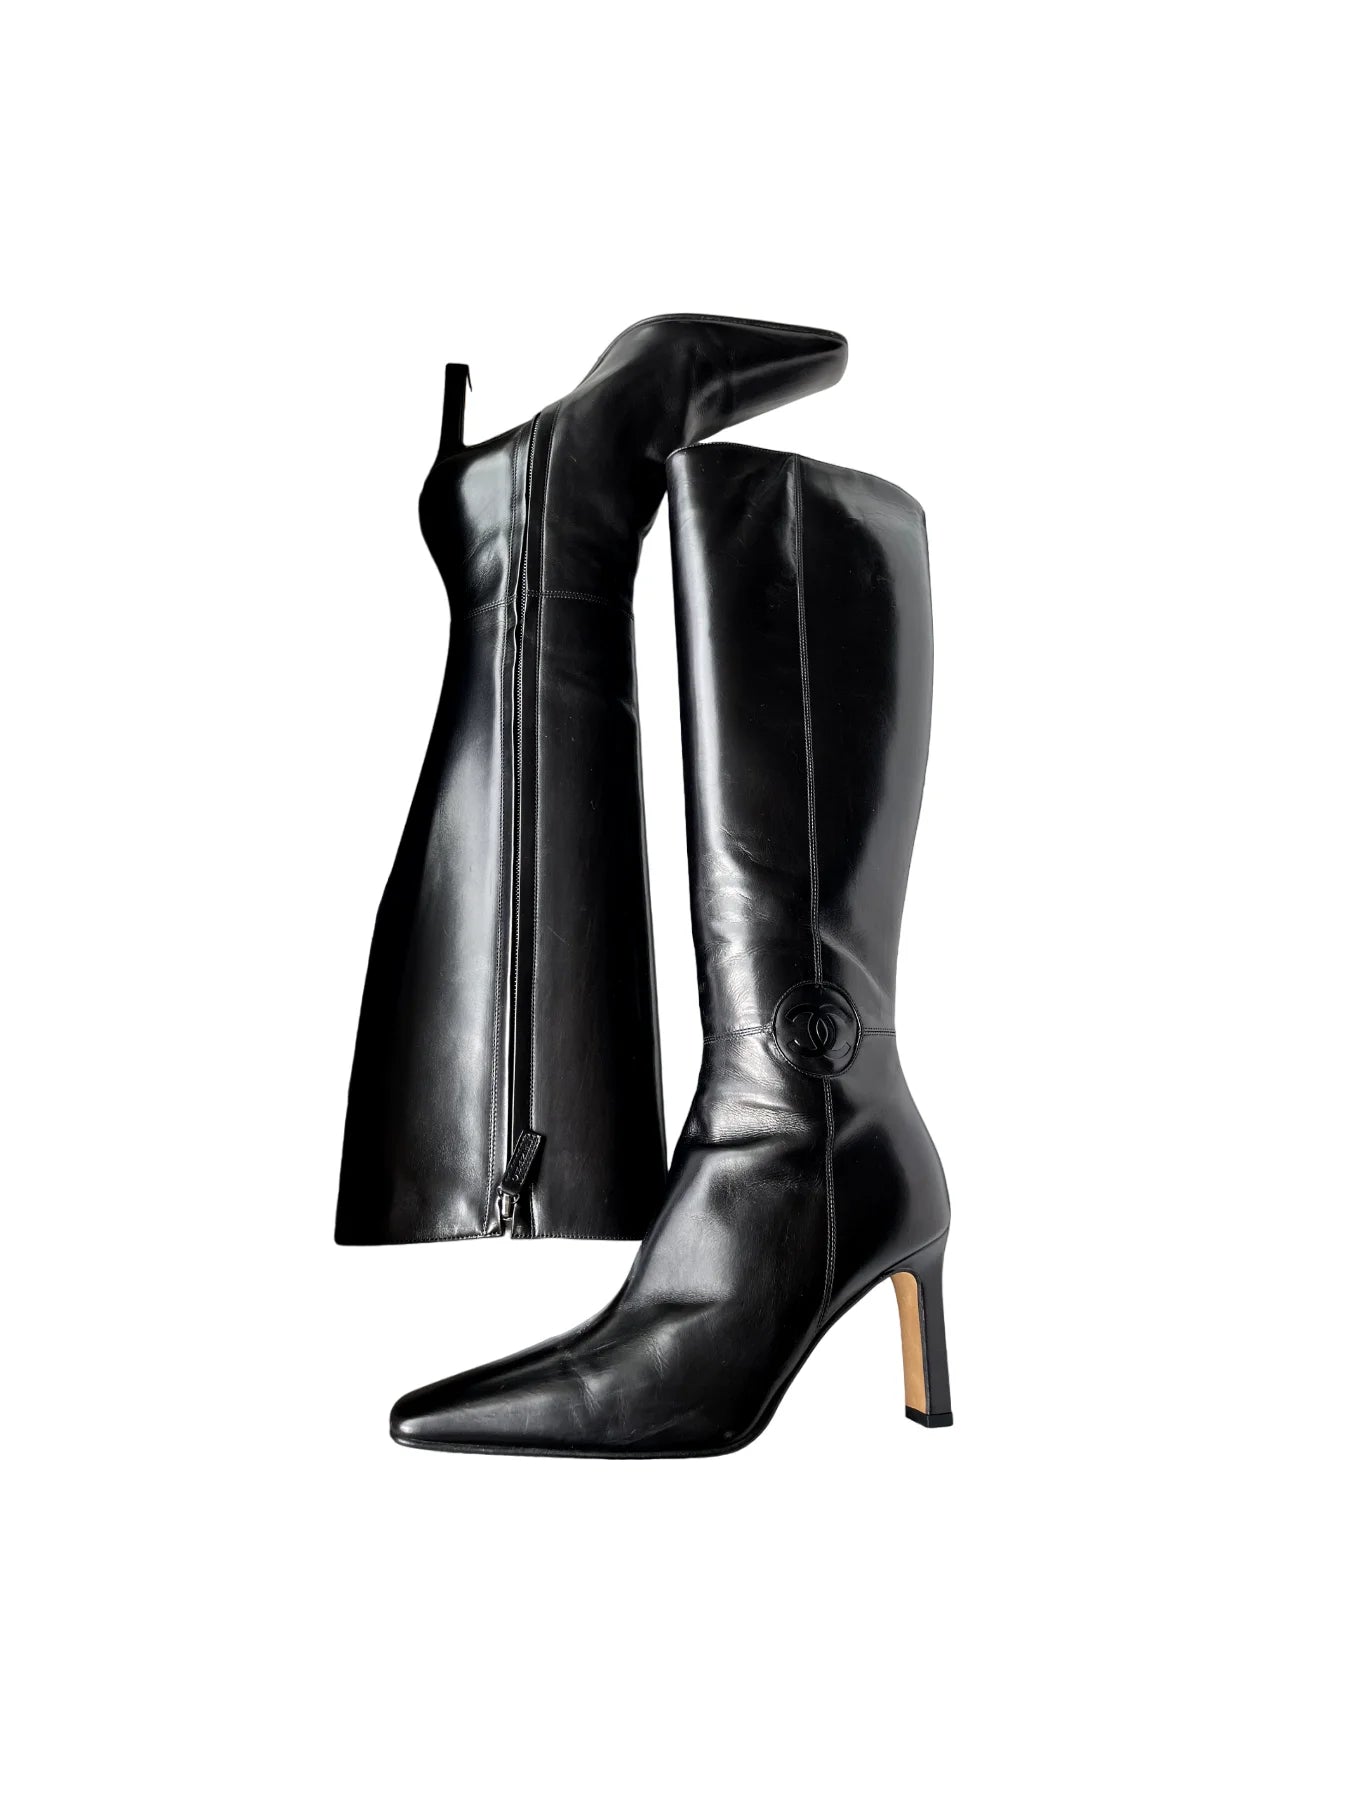 CHANEL KNEE-HIGH LOGO LEATHER BOOTS IT 36.5